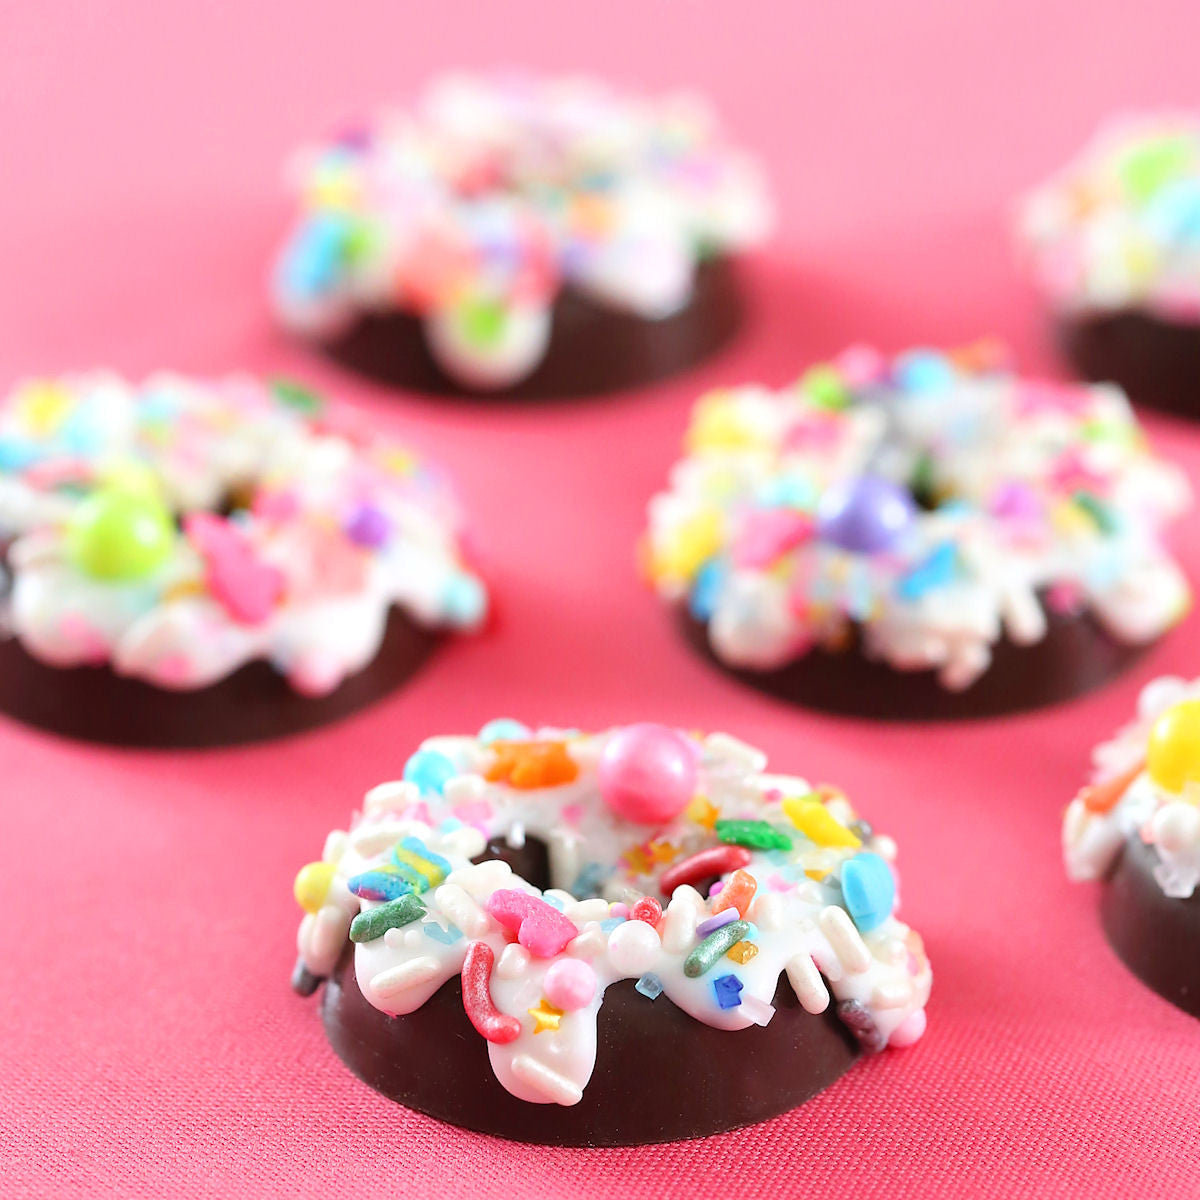 Candy Chocolate Doughnuts with Sprinkles